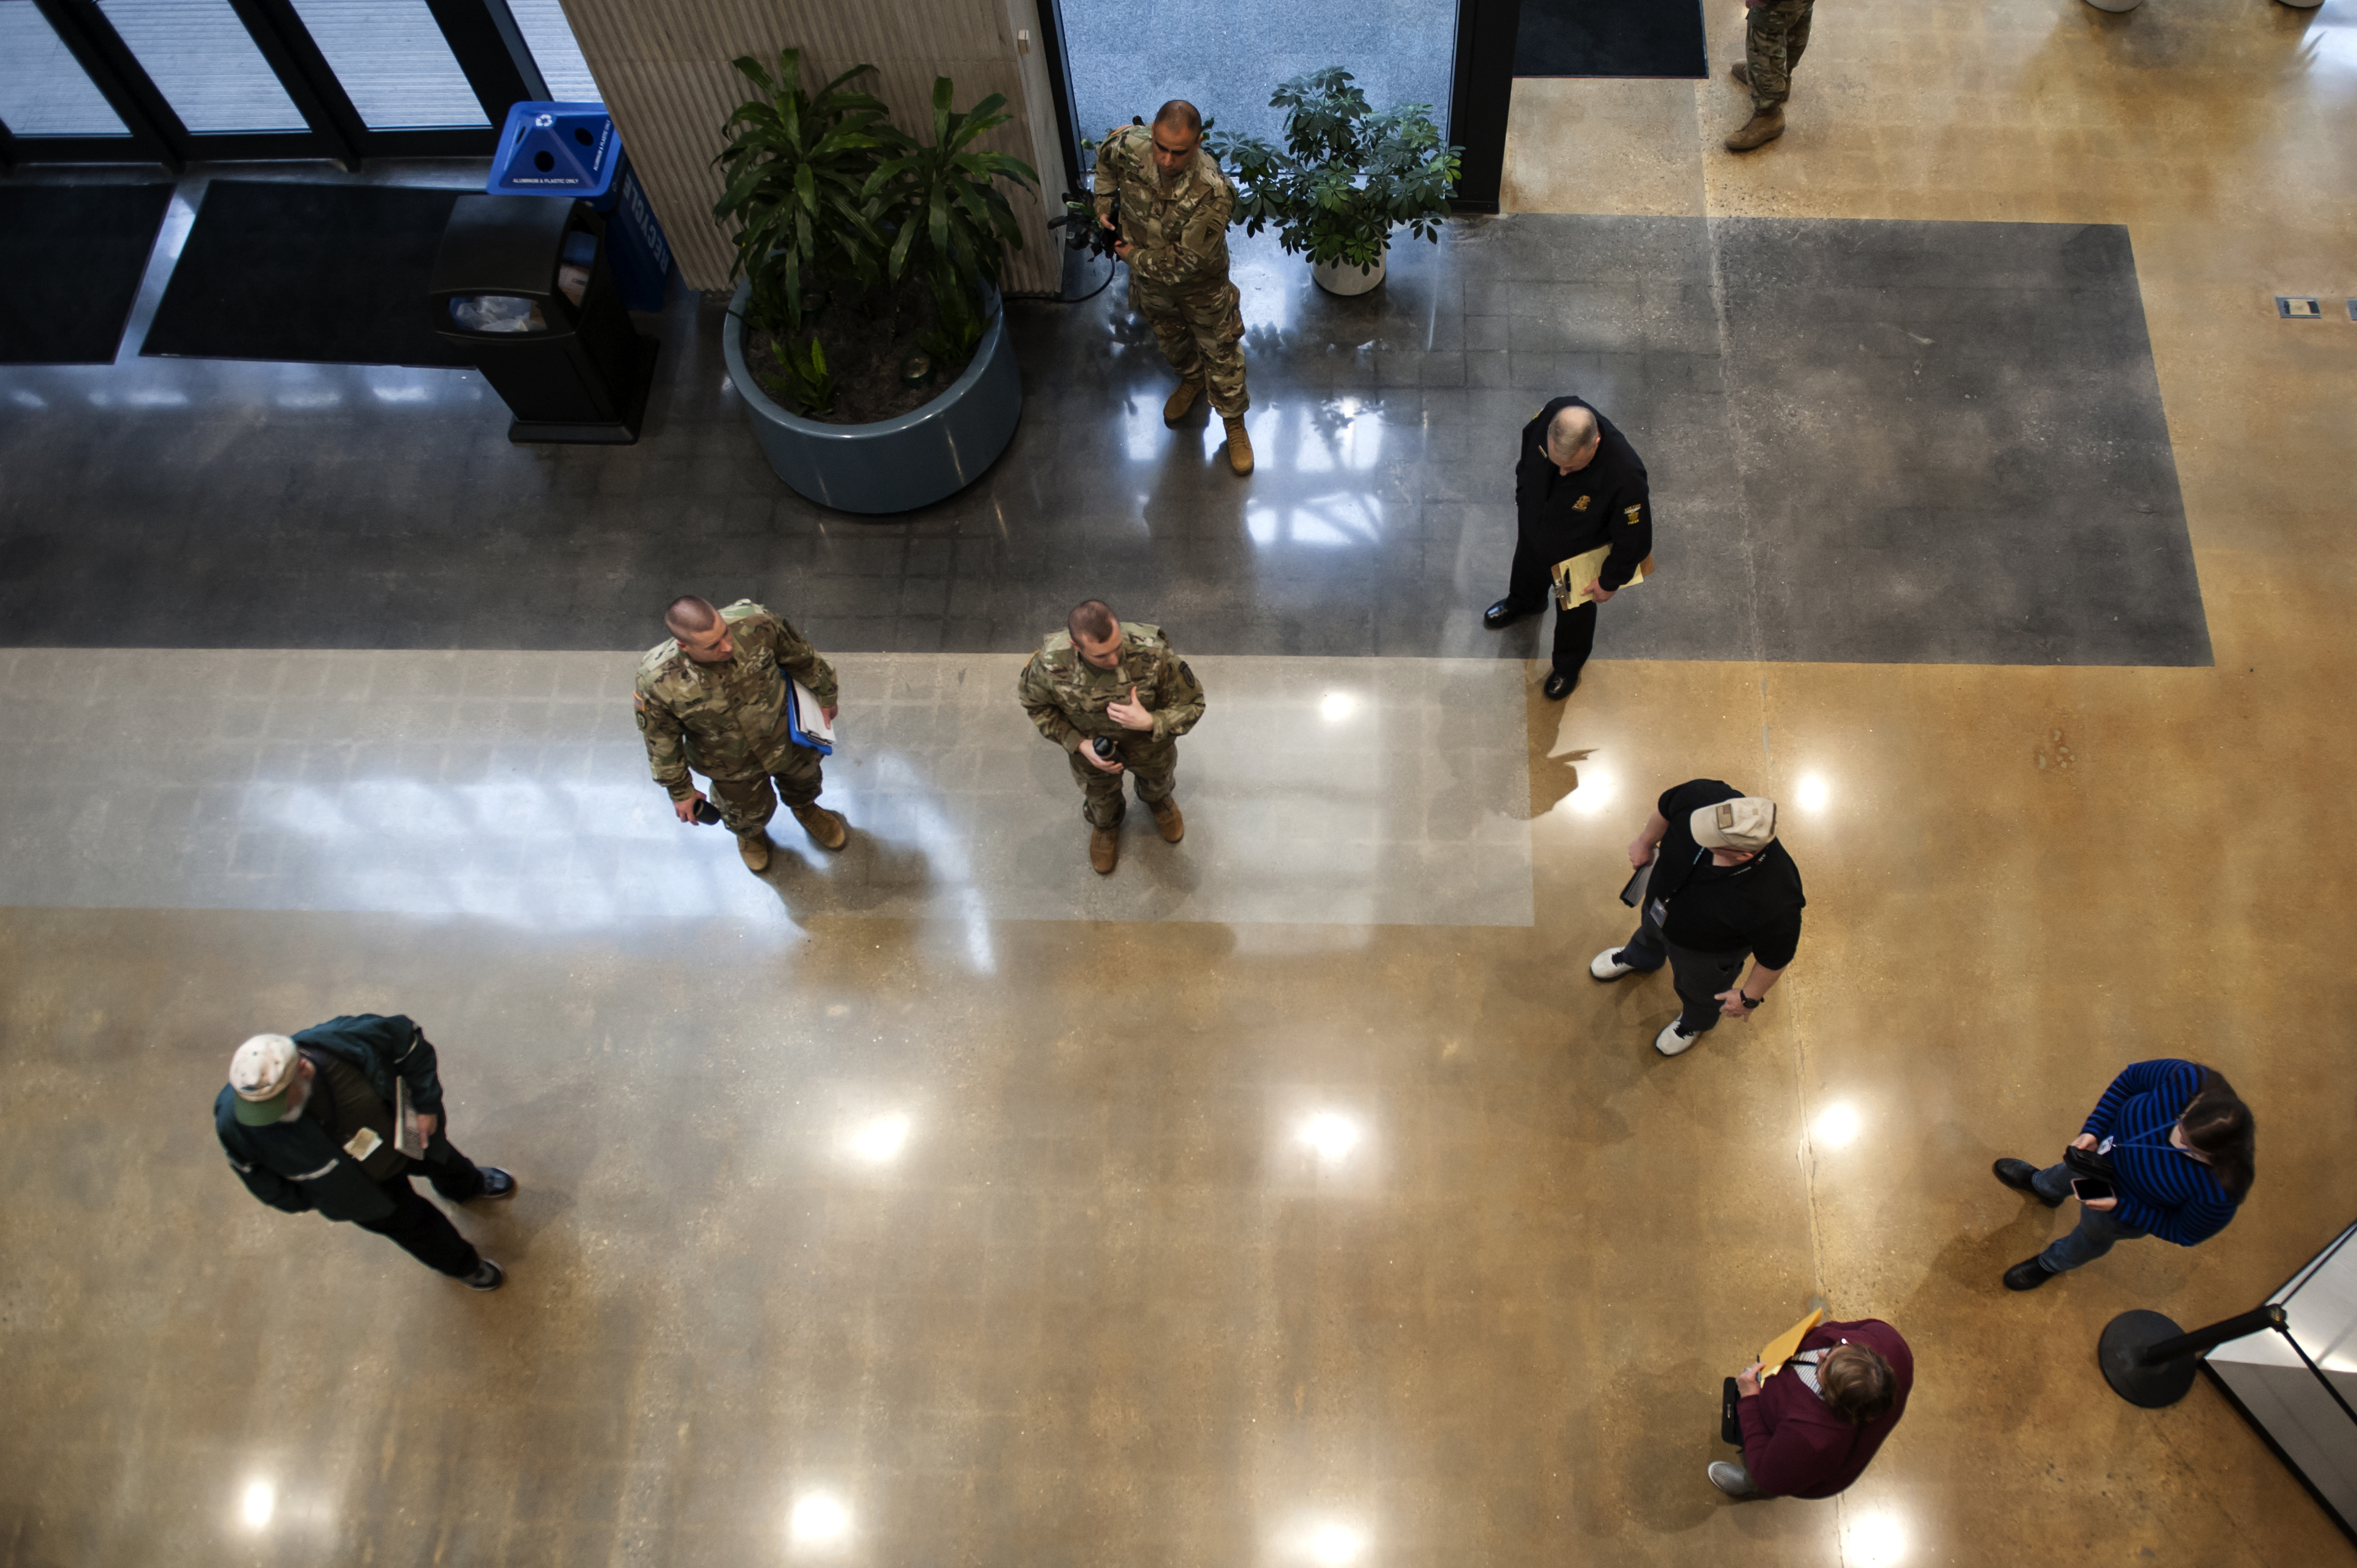 Soldiers and regional management in lobby as seen from above.